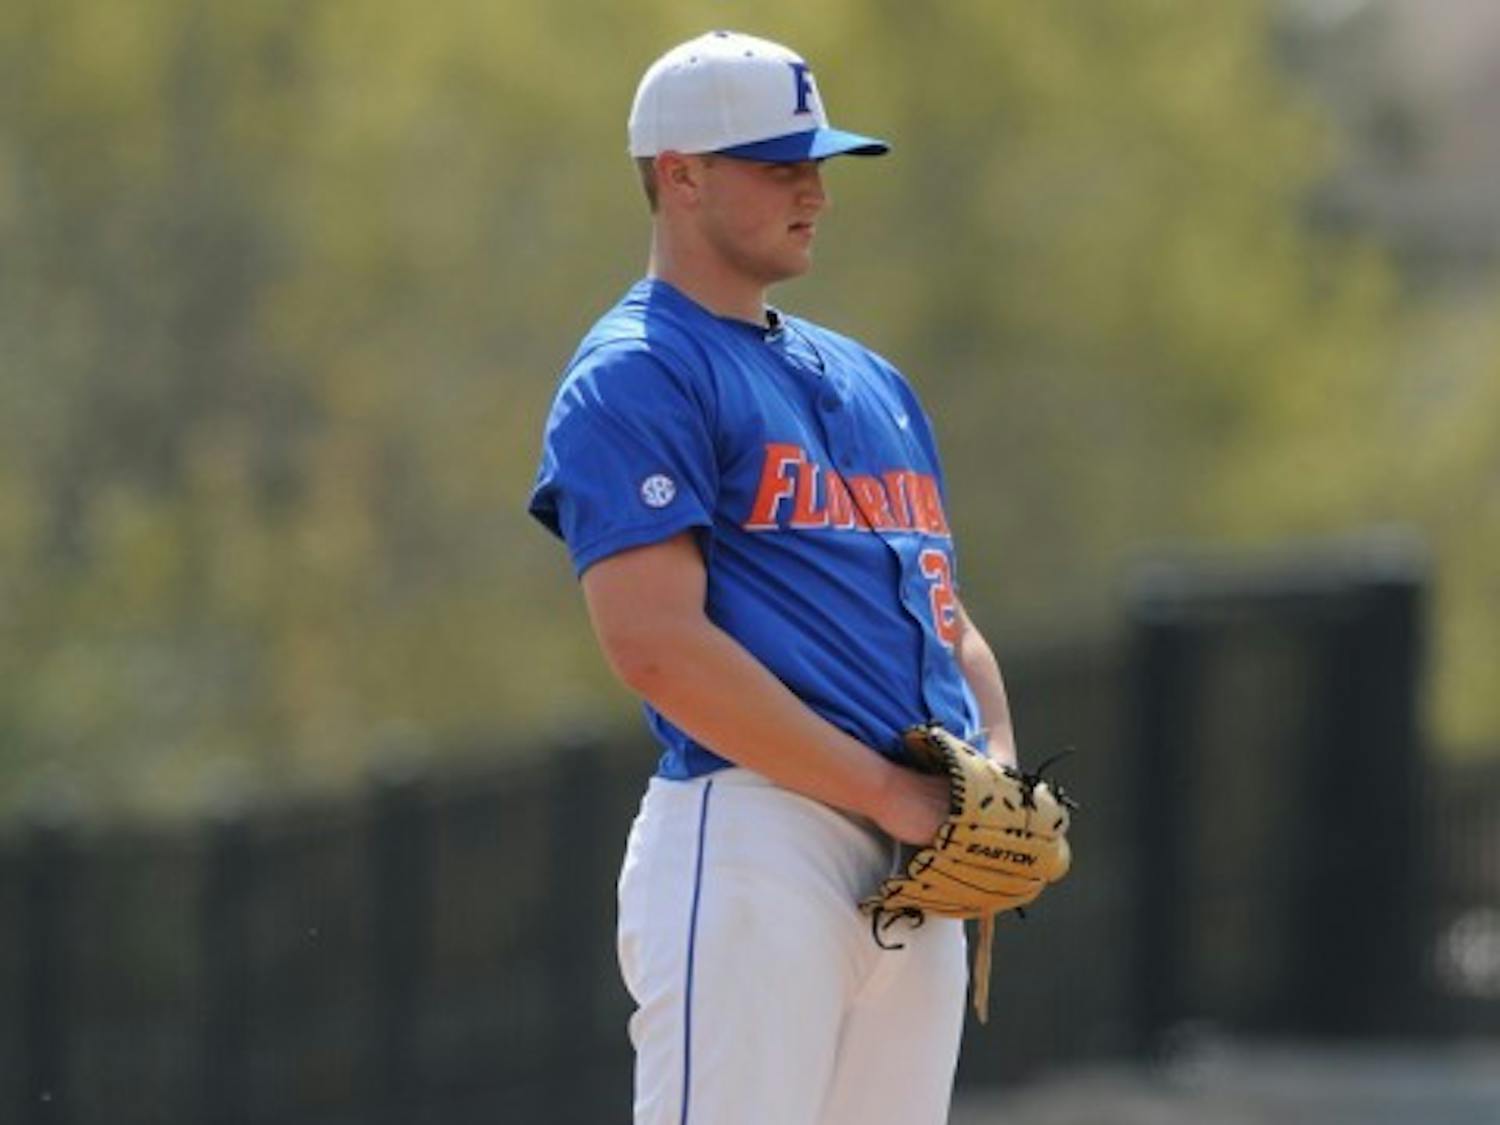 Florida pitcher Karsten Whitson prepares to throw a pitch during a game against USF last season. Whitson has been limited this year.